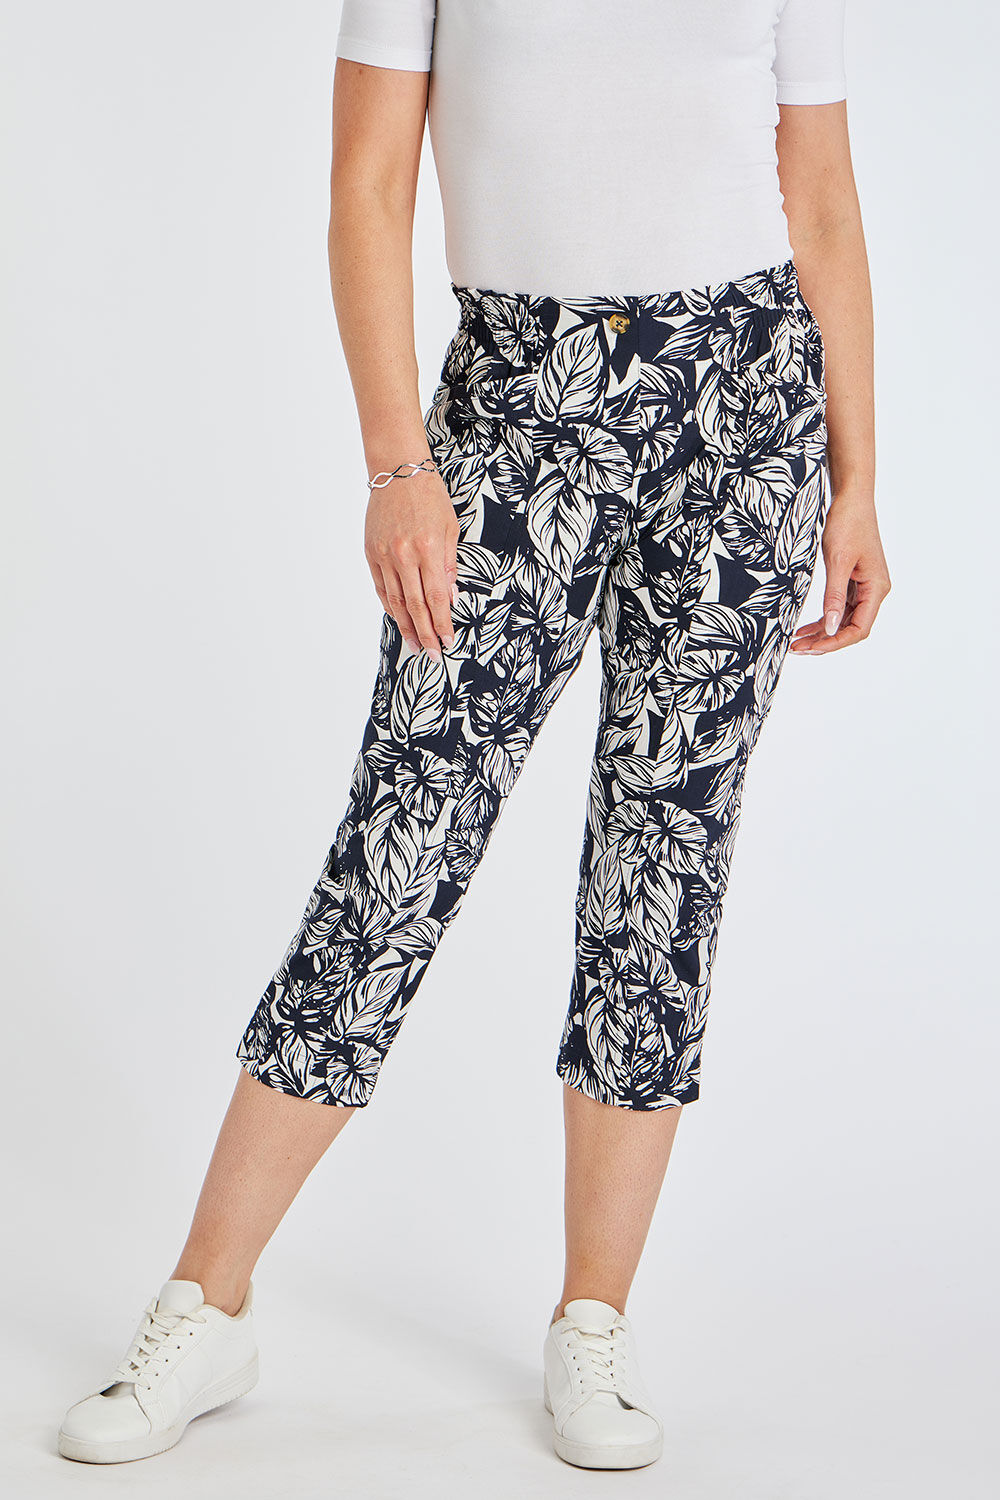 Bonmarche Navy Leaf Print Elasticated Back Essential Cropped Trousers, Size: 16